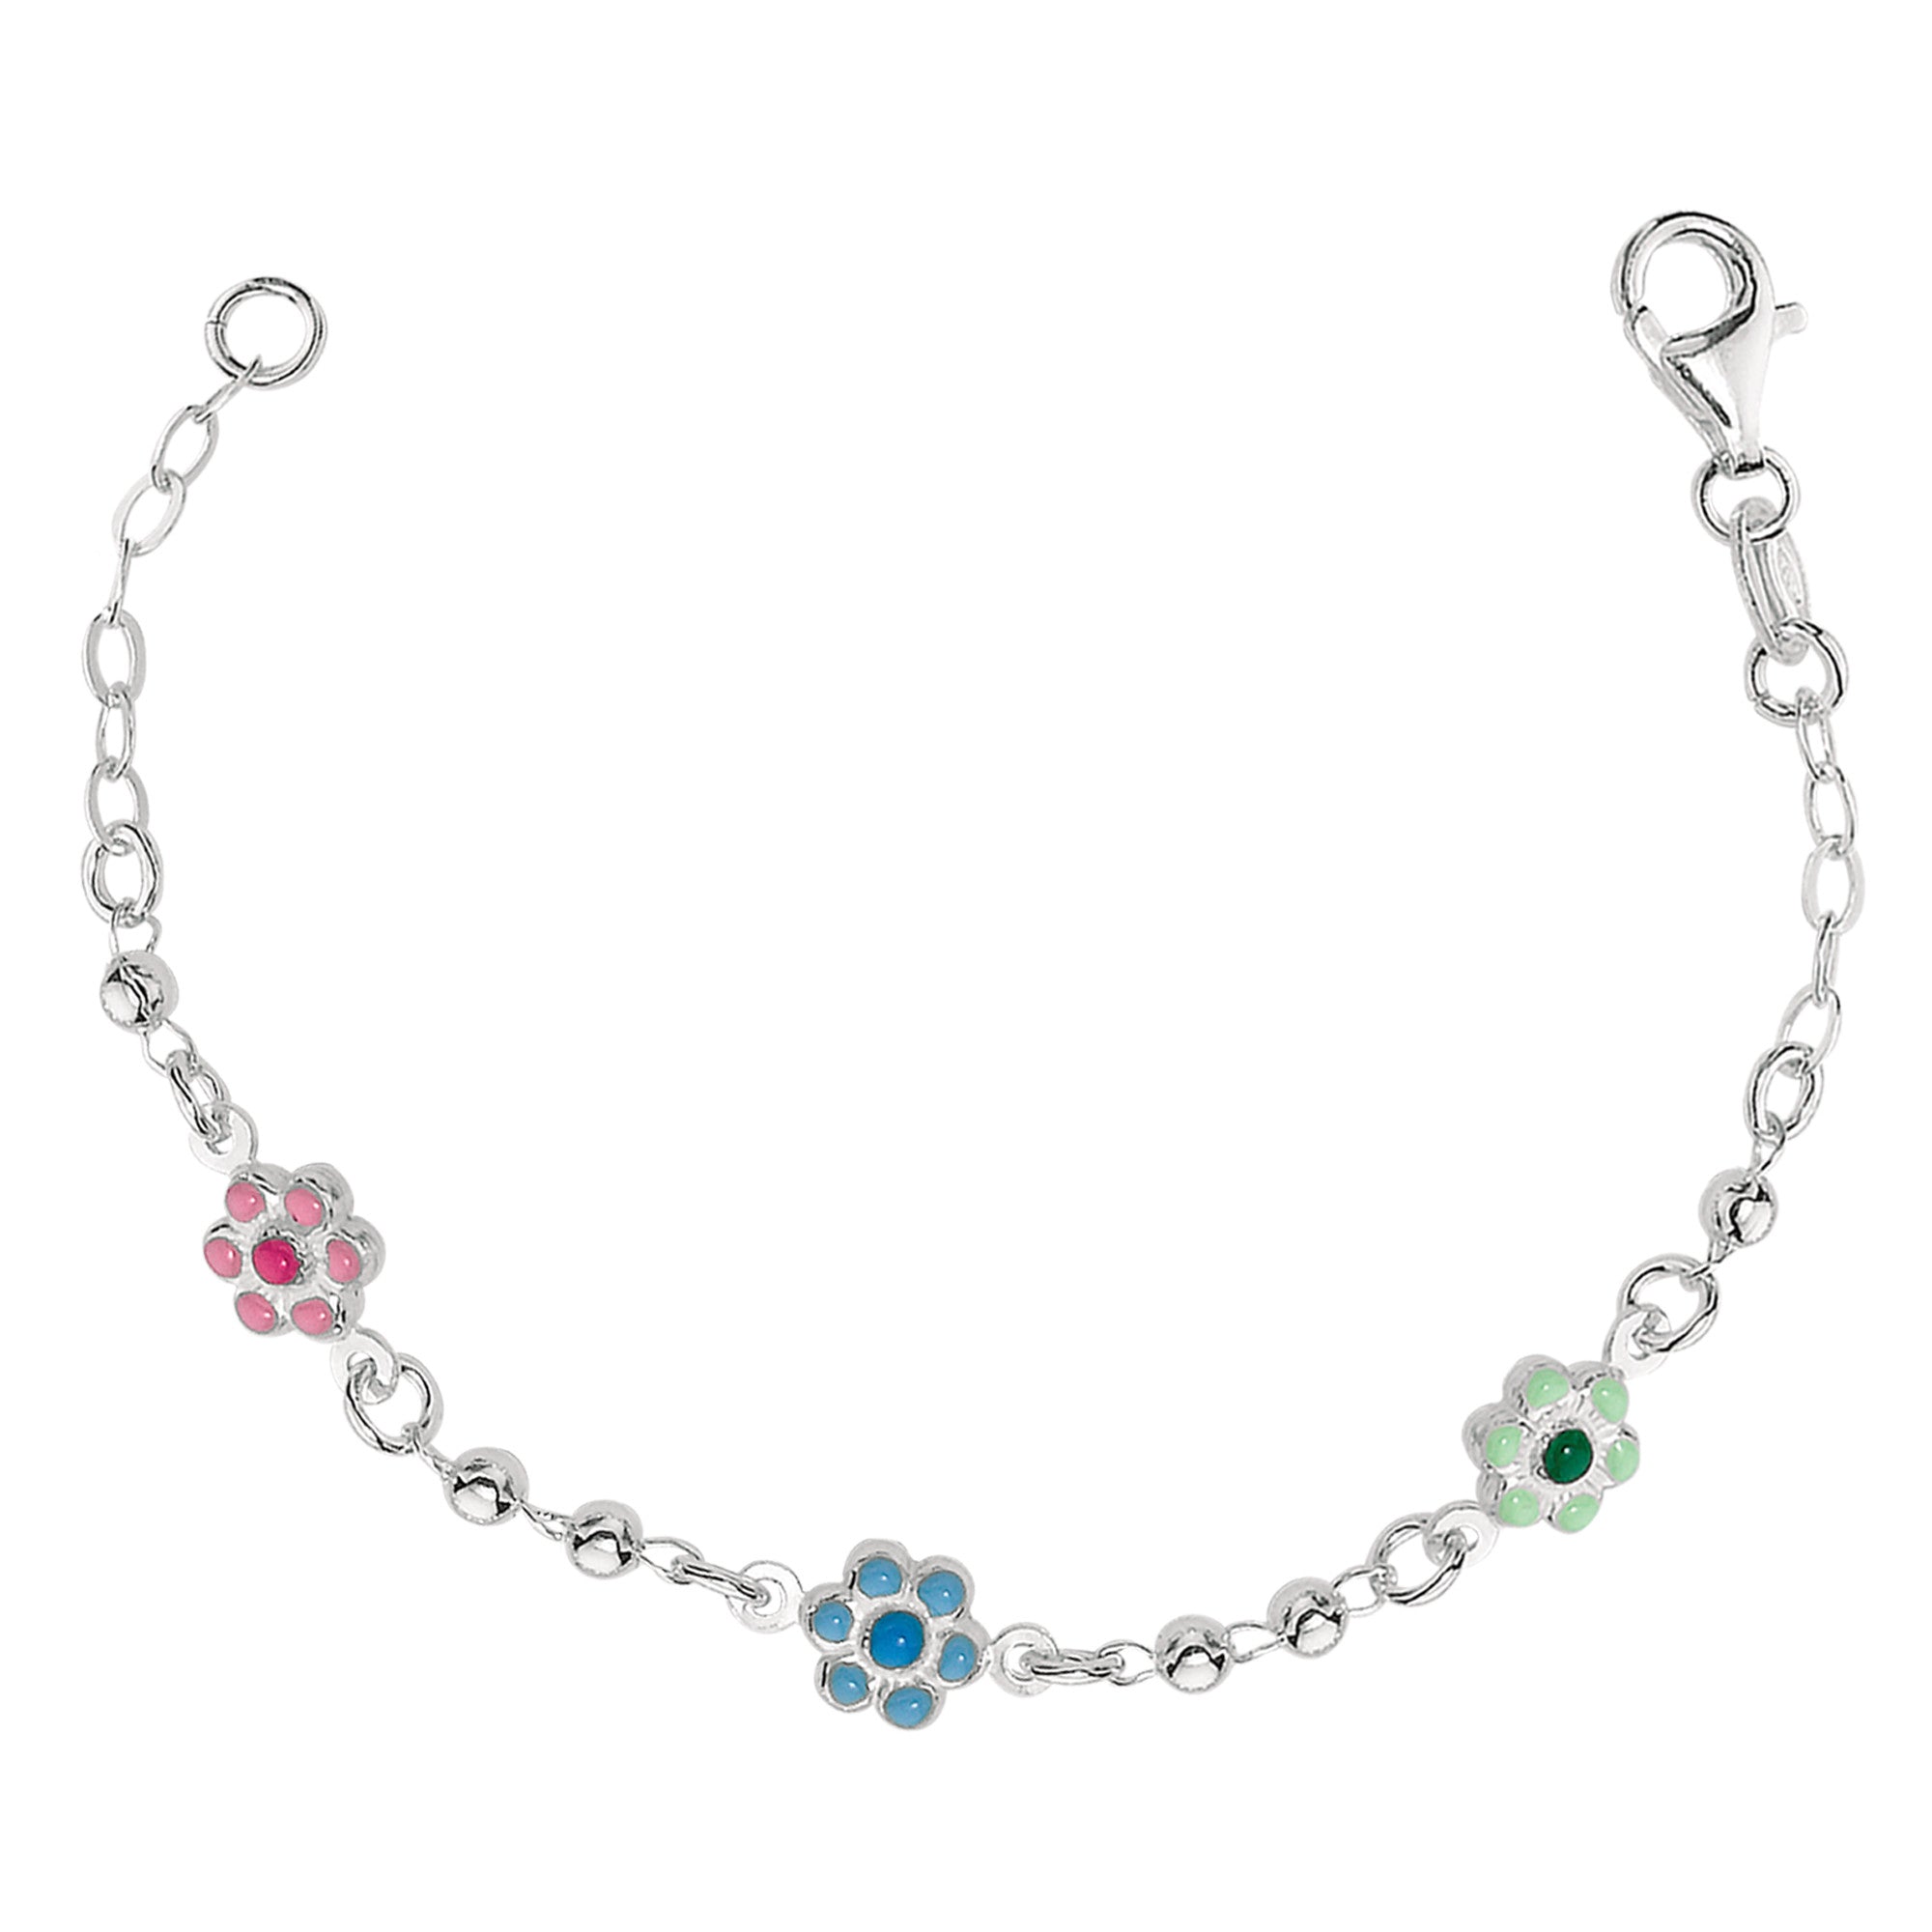 Baby Bracelet With Enameled Flower Charms In Sterling Silver - 6 Inches fine designer jewelry for men and women